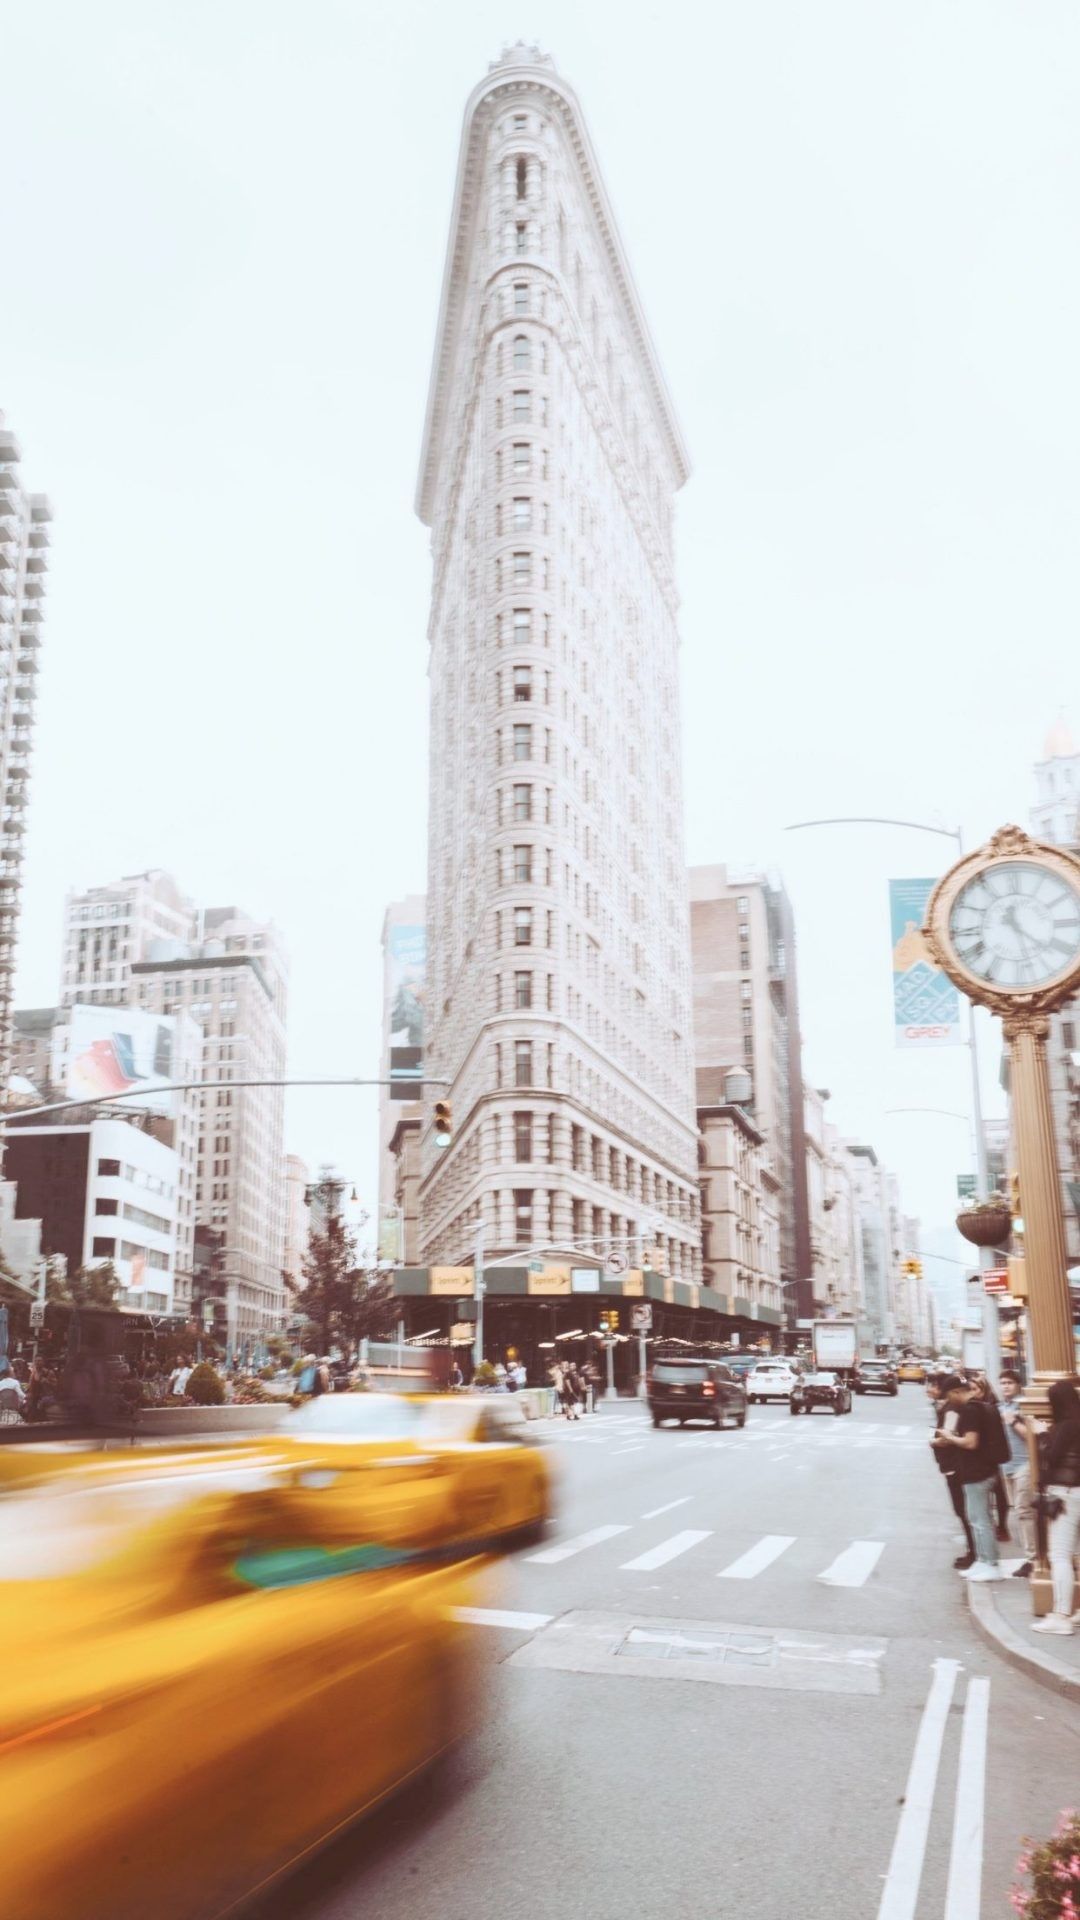 A blurry image of a yellow taxi driving by a tall building. - Travel, New York